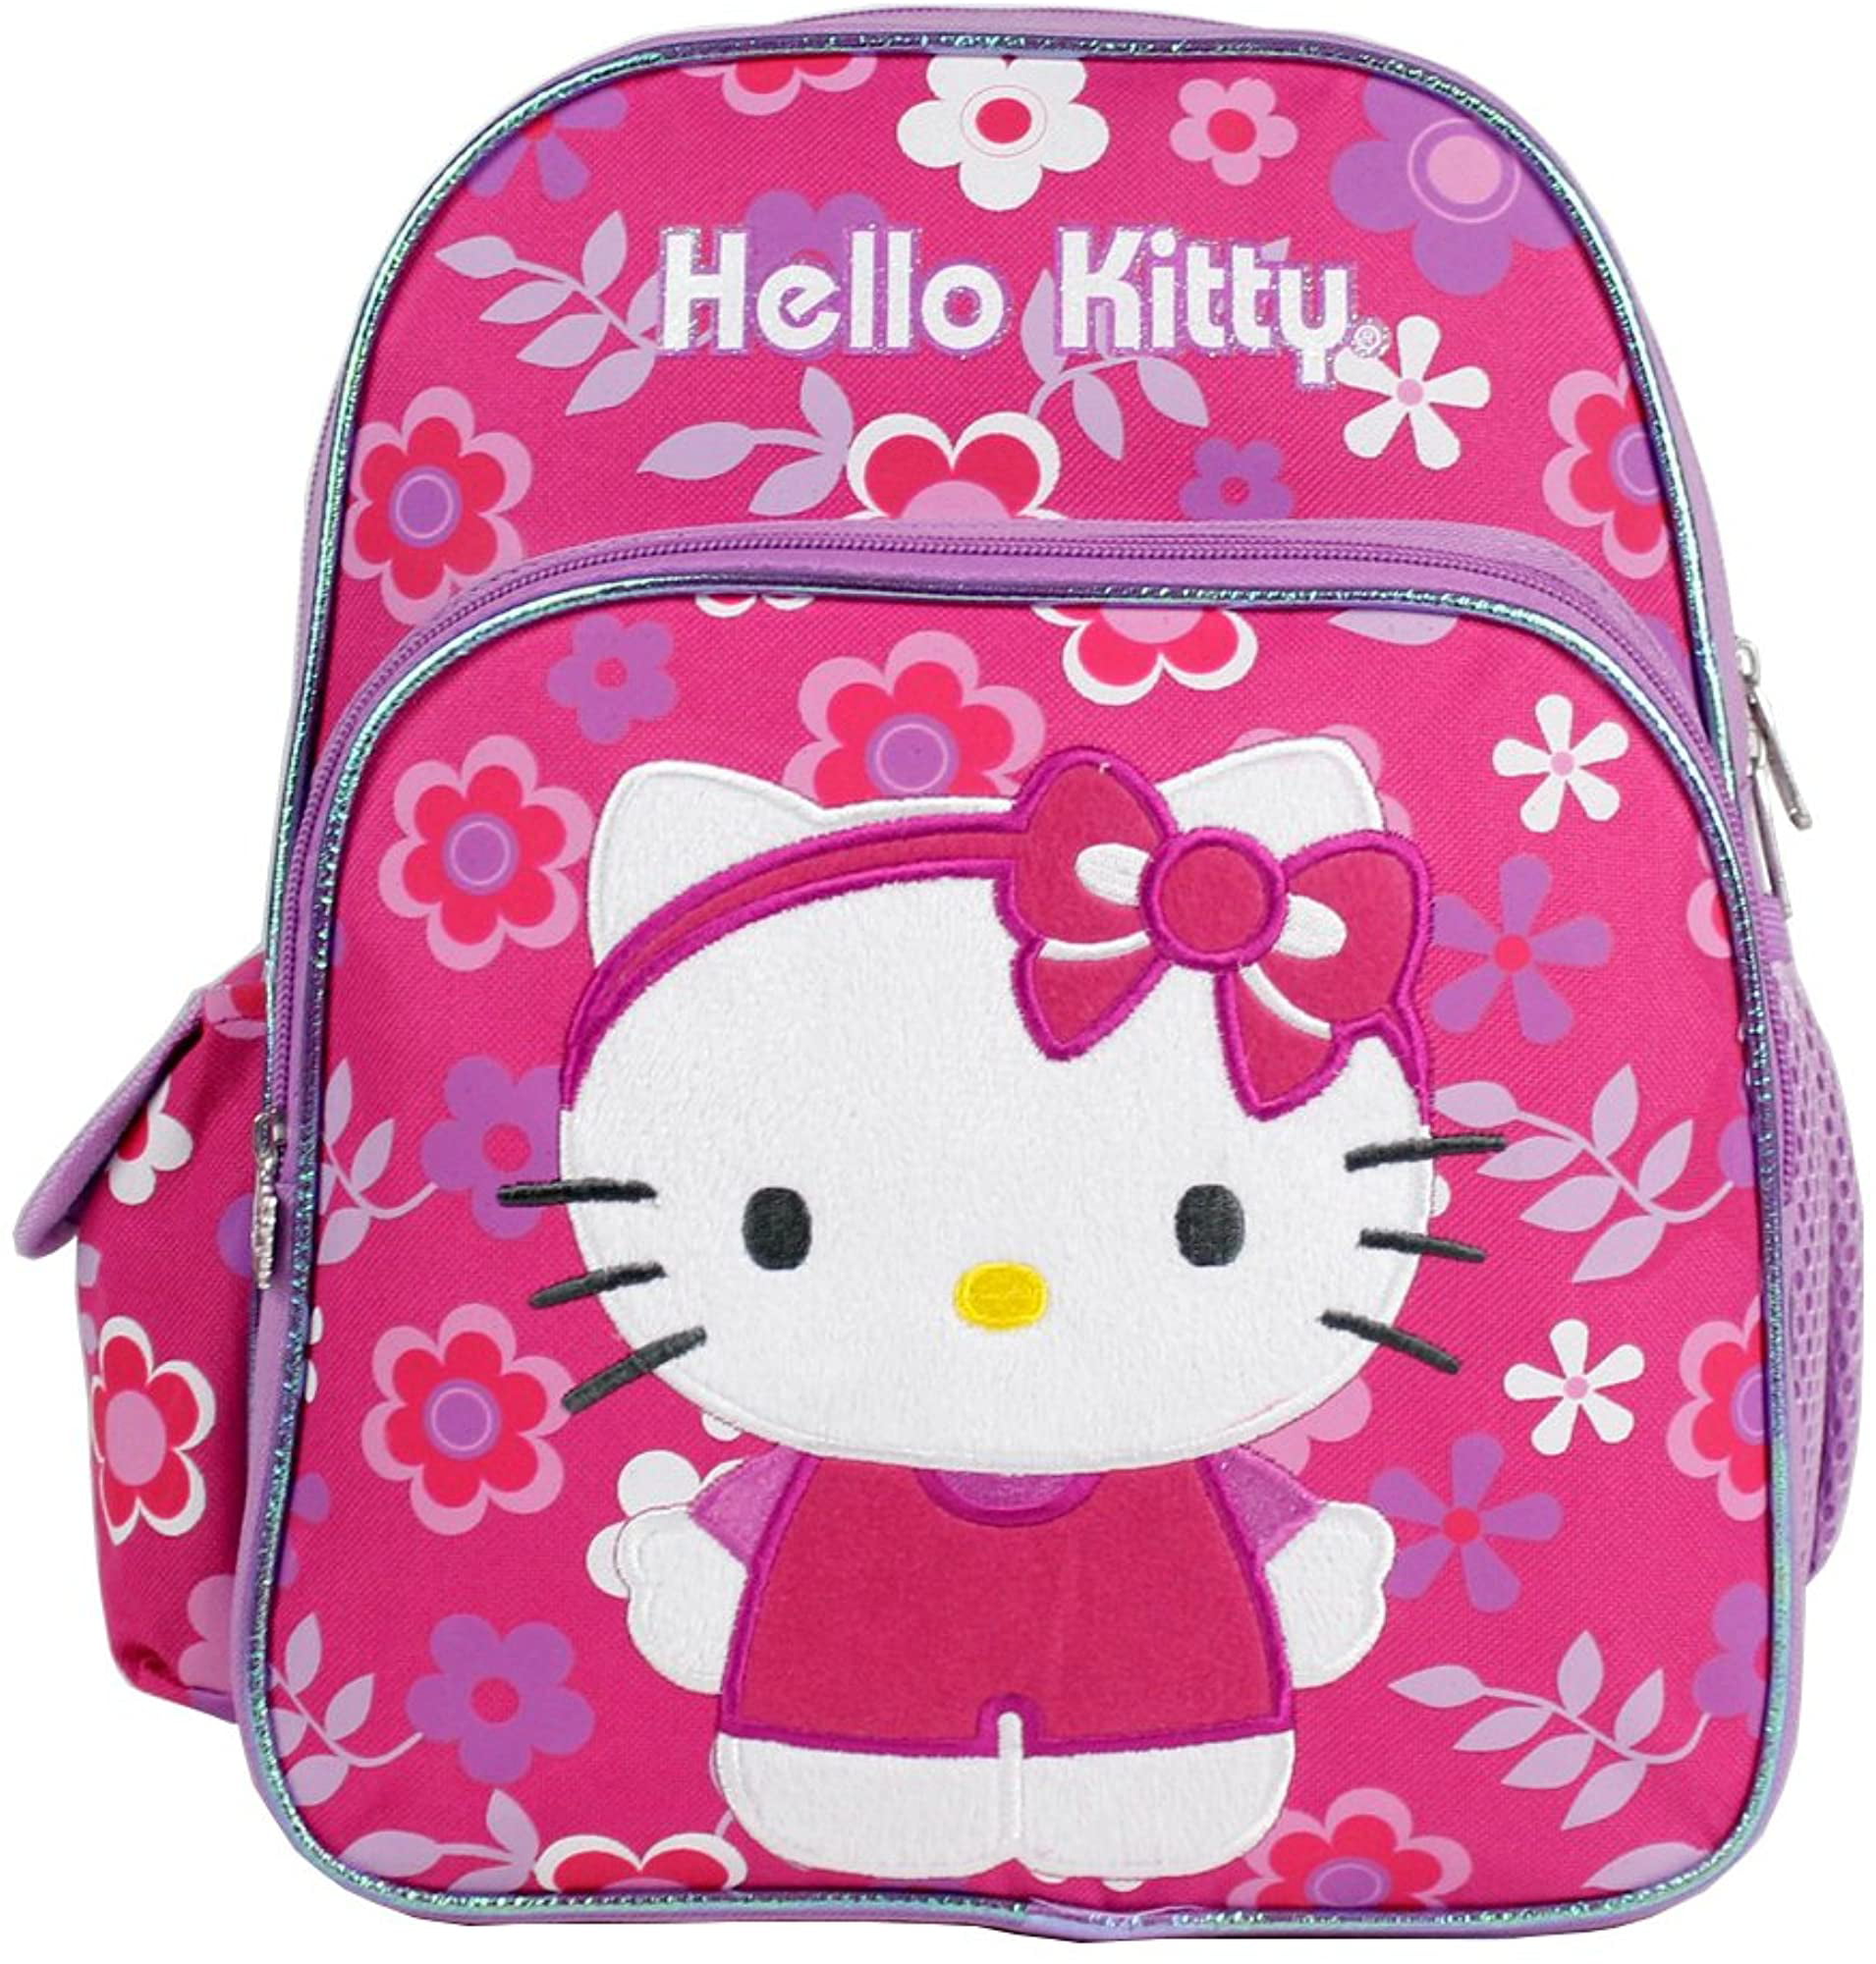 HELLO KITTY BACKPACK TWO TONED PINK ARGYLE LARGE SCHOOL BAG SANRIO 16" NWT 